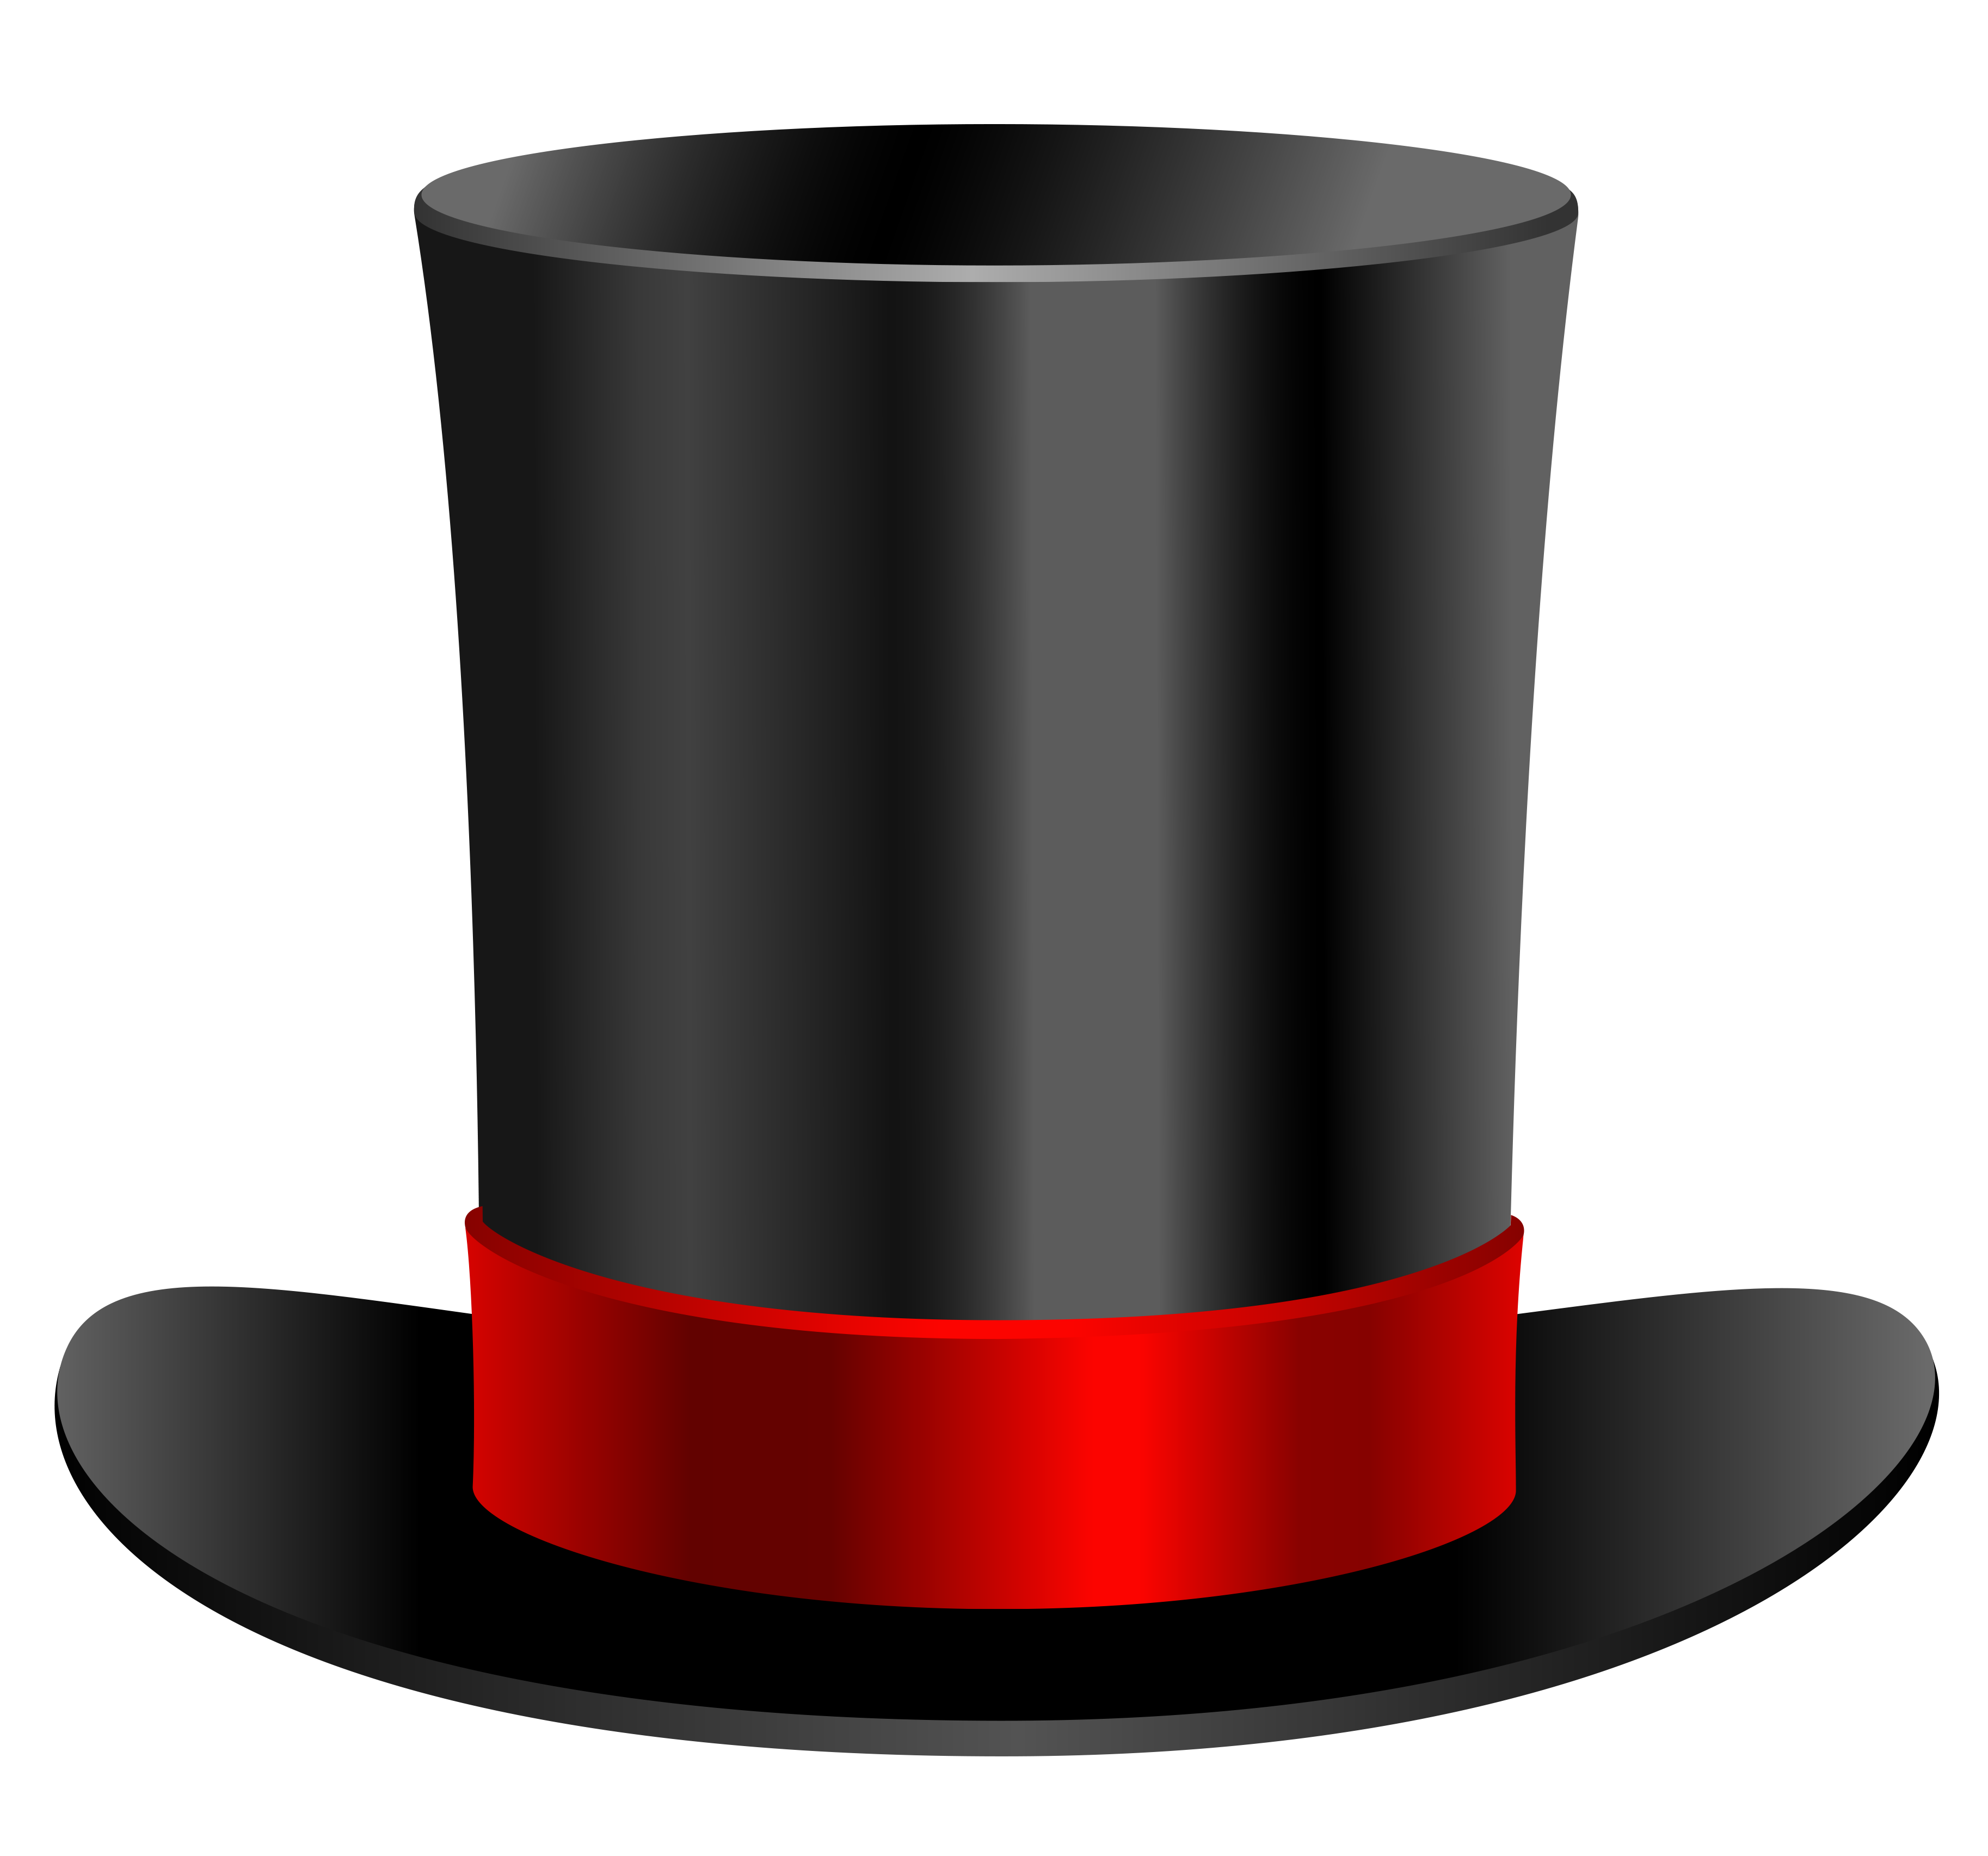 https://www.ia764.org/wp-content/uploads/2017/09/Top-hat-clipart-free-clipart-images.png